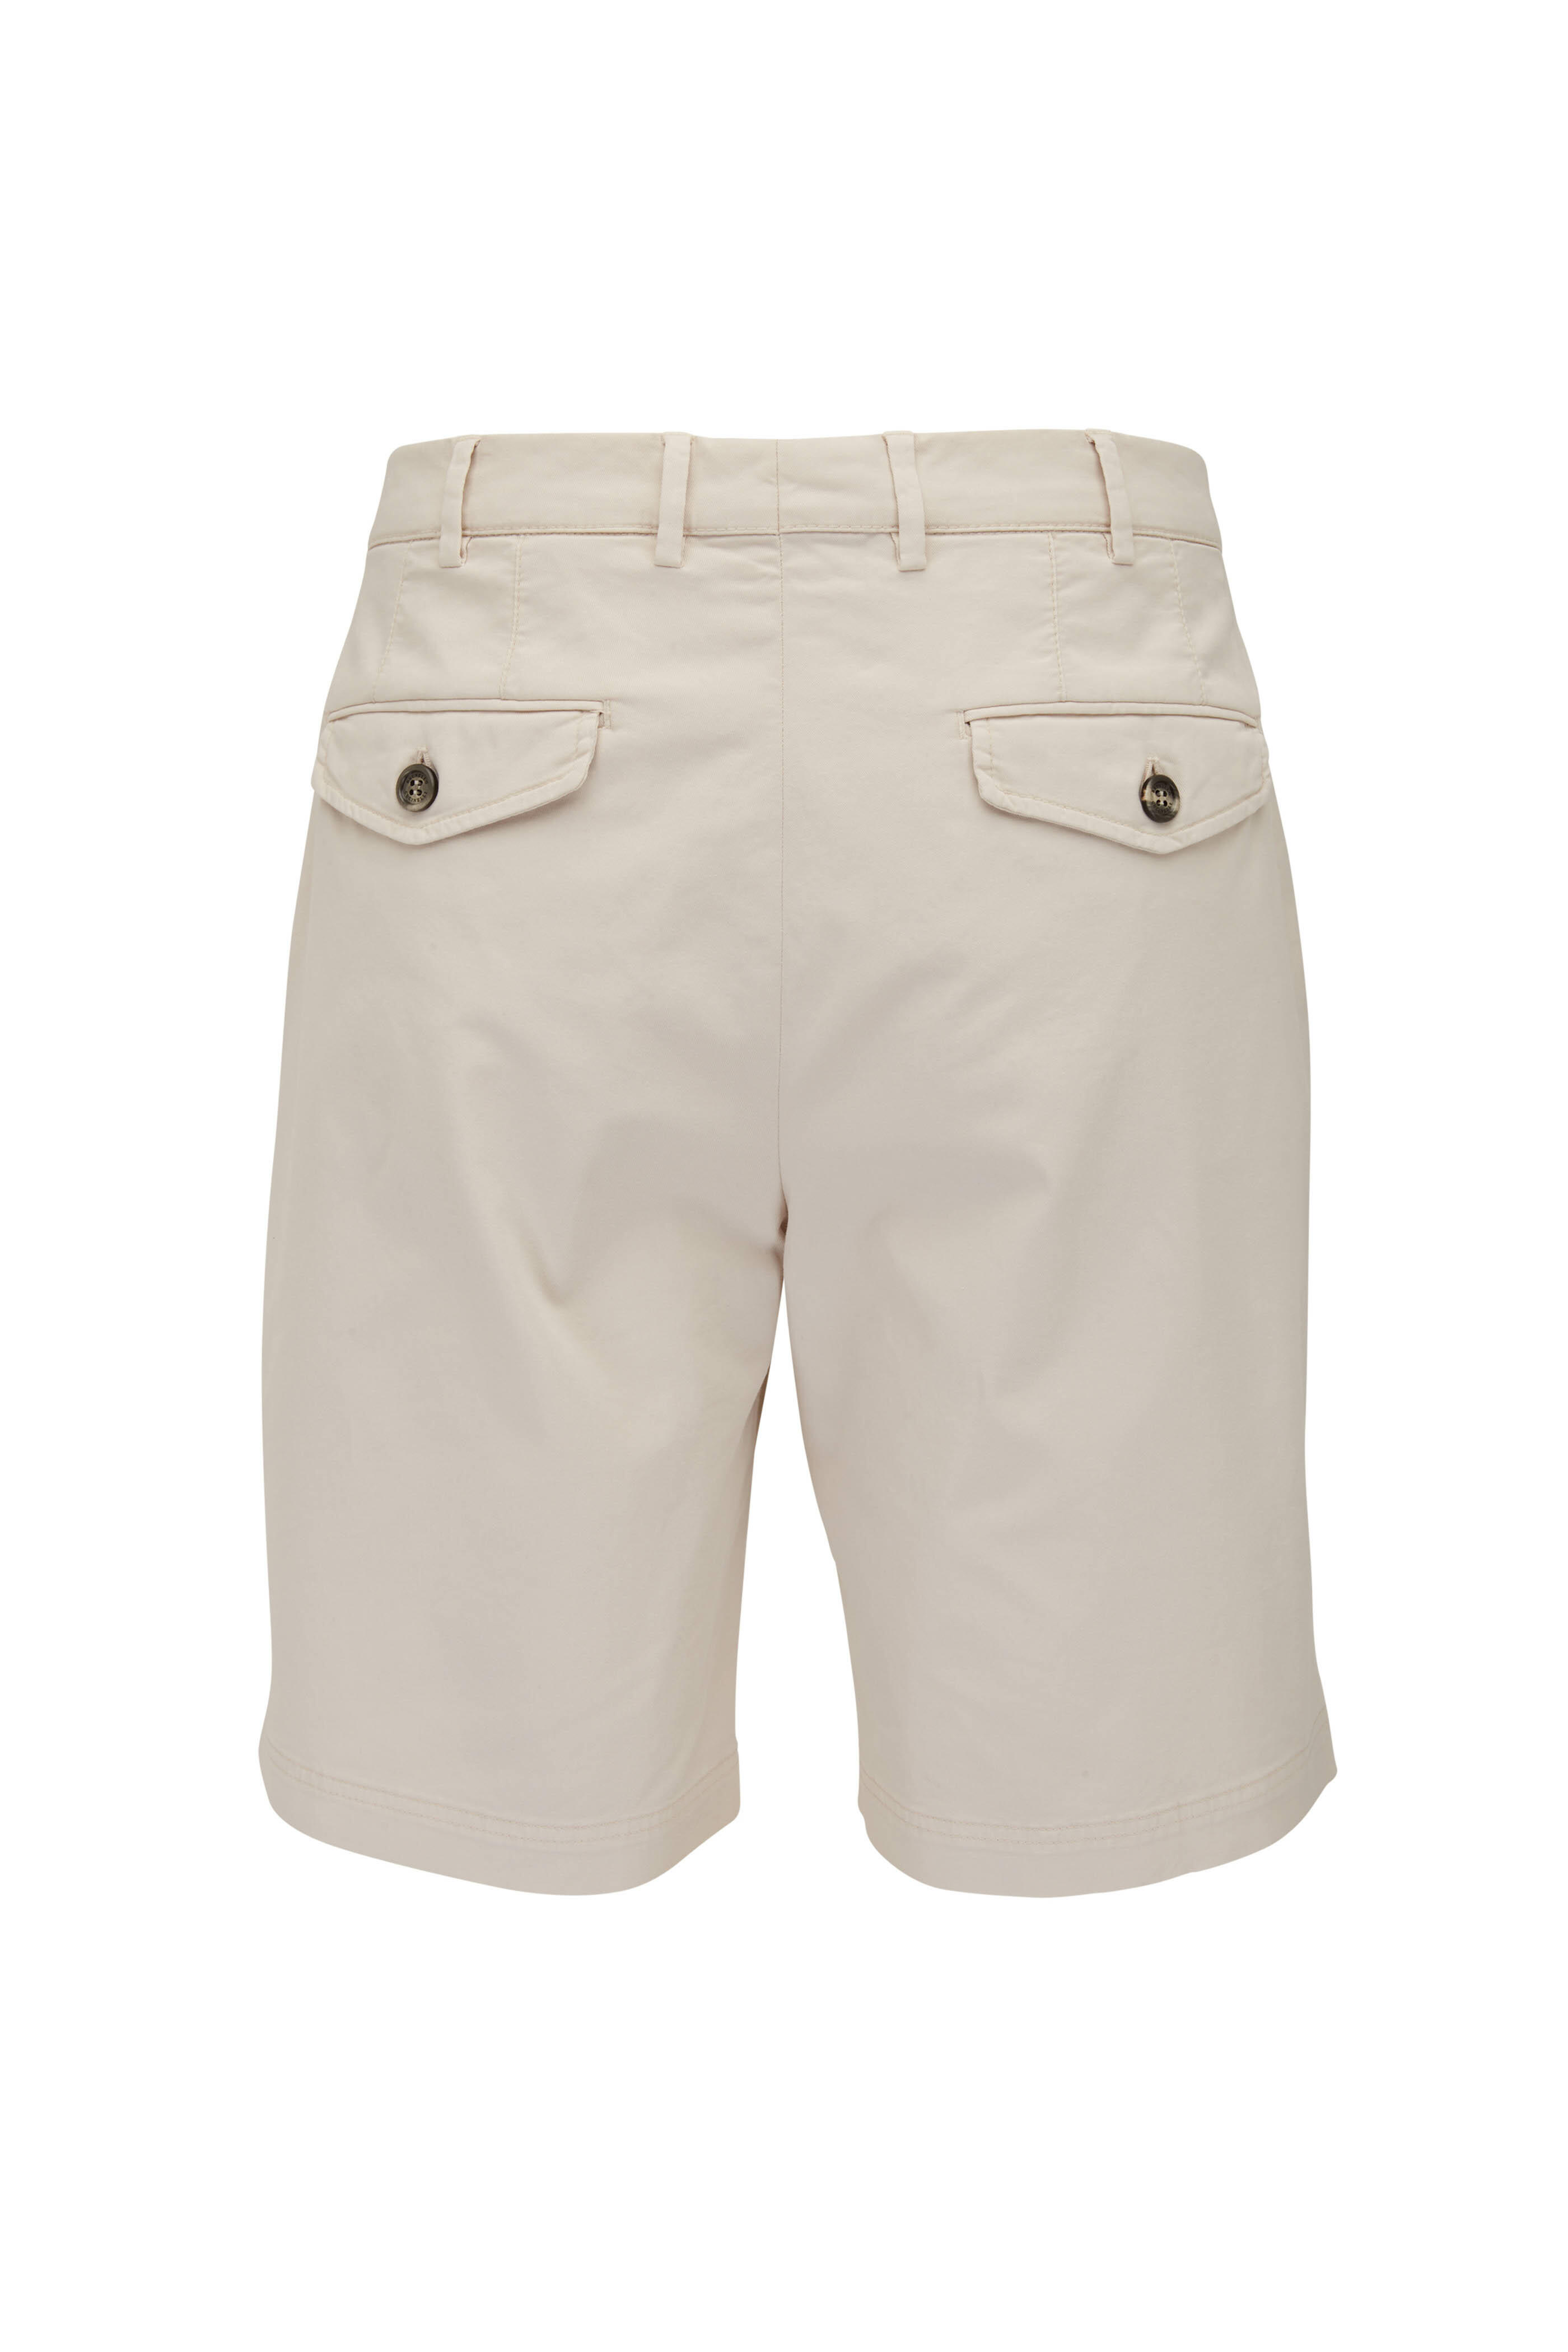 Stretch To Summer Twill Shorts - Dusty Taupe